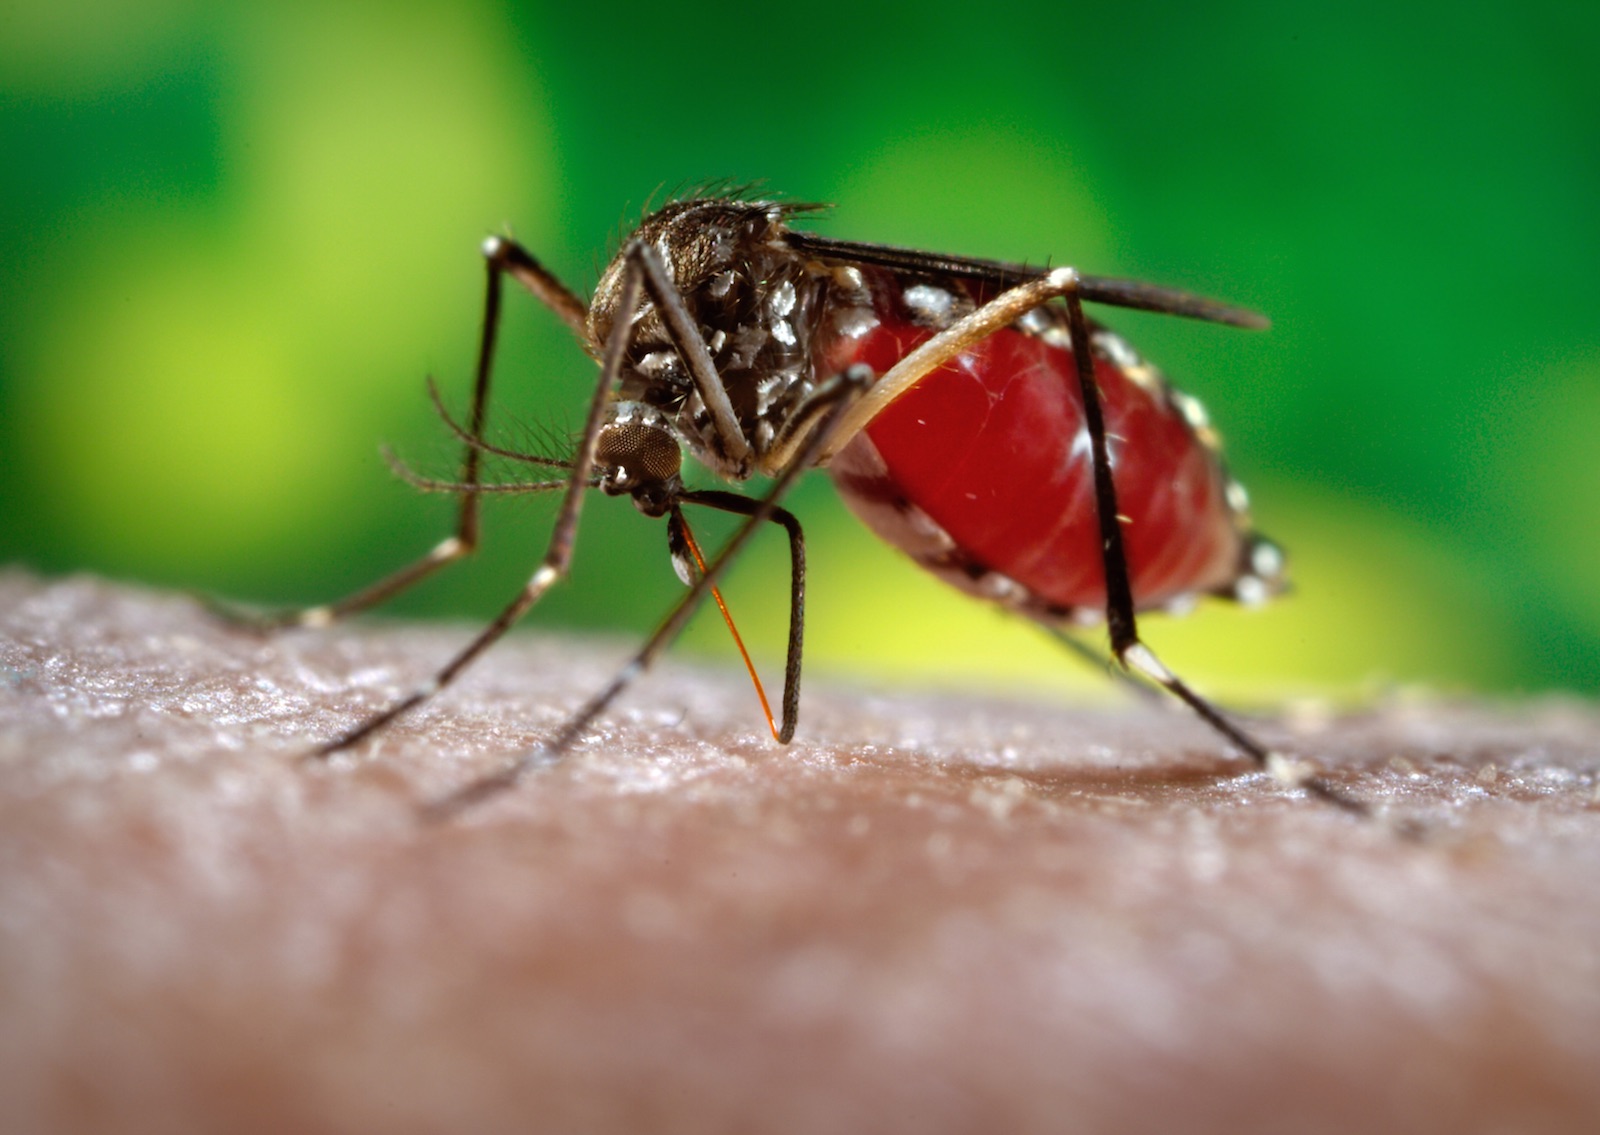 Zika virus is transmitted by a specific mosquito called Aedes aegypti. The mosquito is common in Colombia and other countries where Zika has become prevalent. Photo by James Gathany/Centers for Disease Control and Prevention